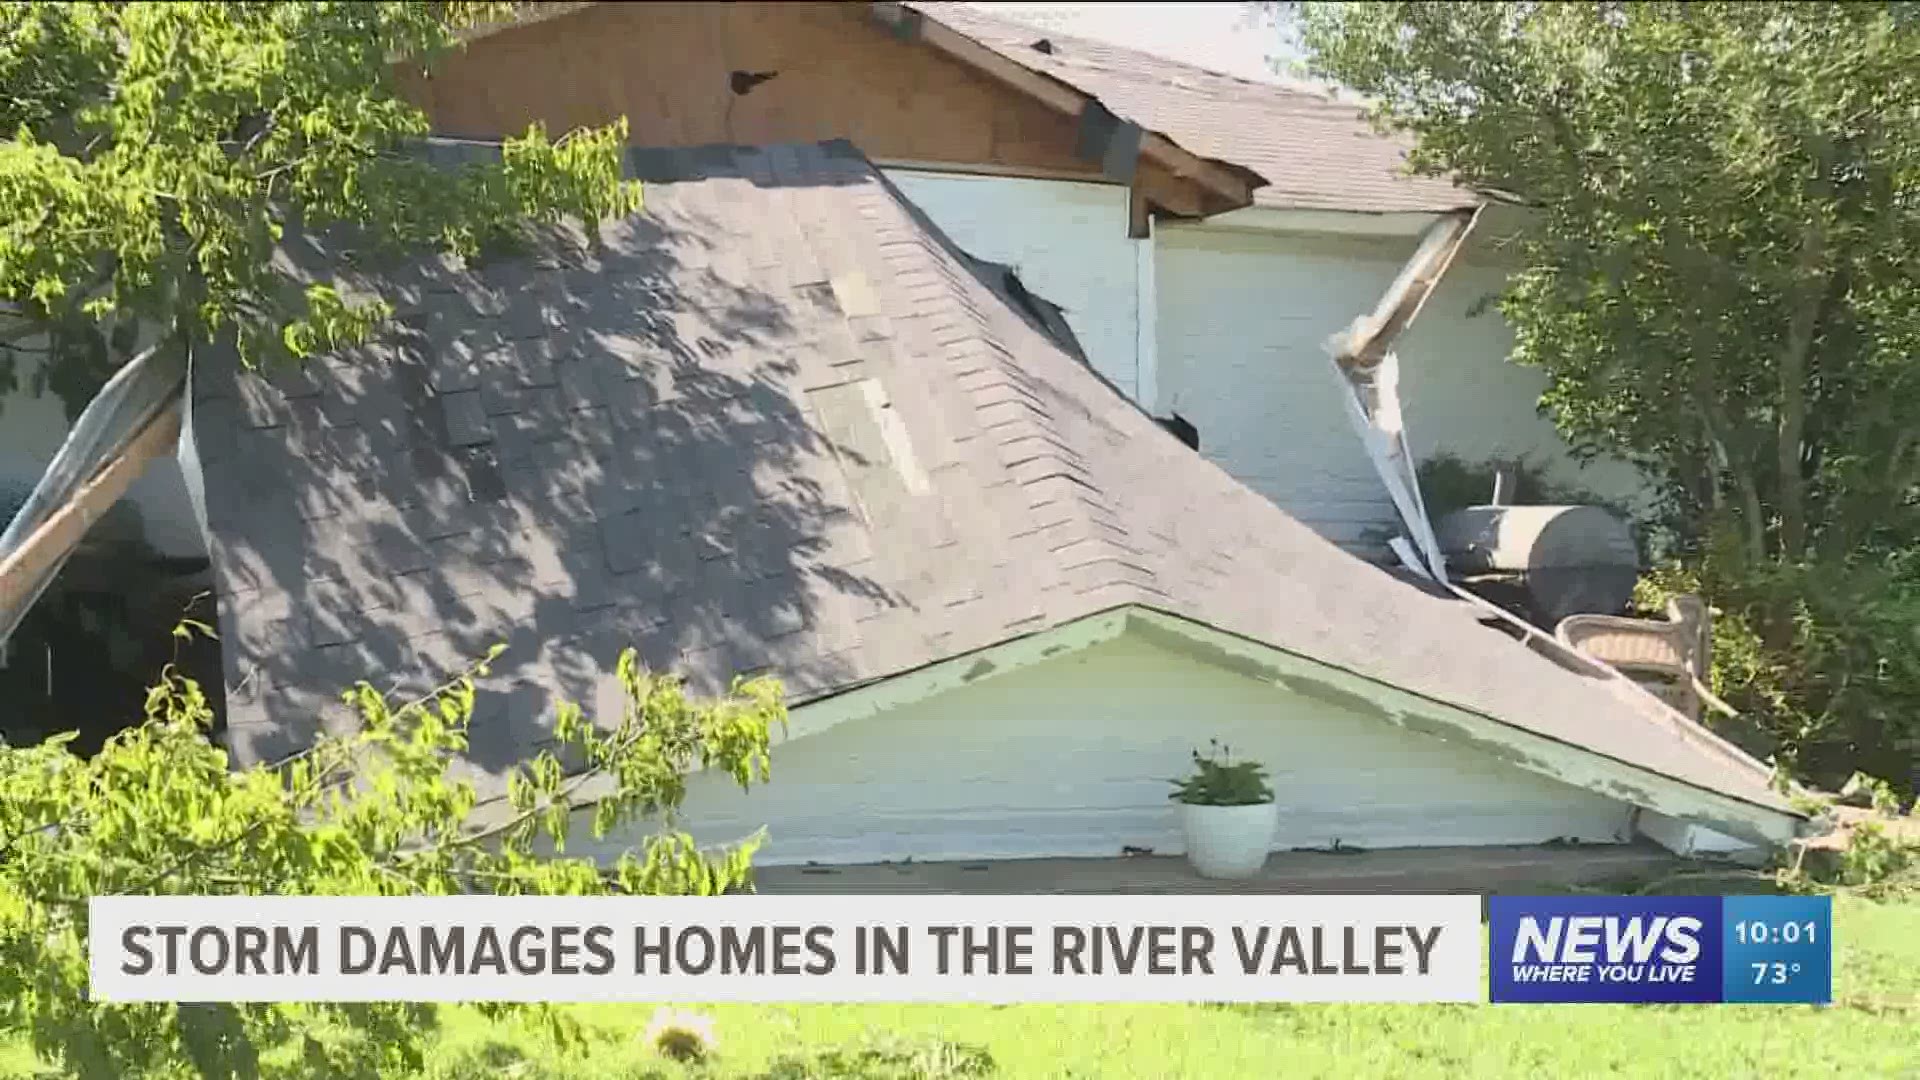 Storm damages homes in the River Valley.